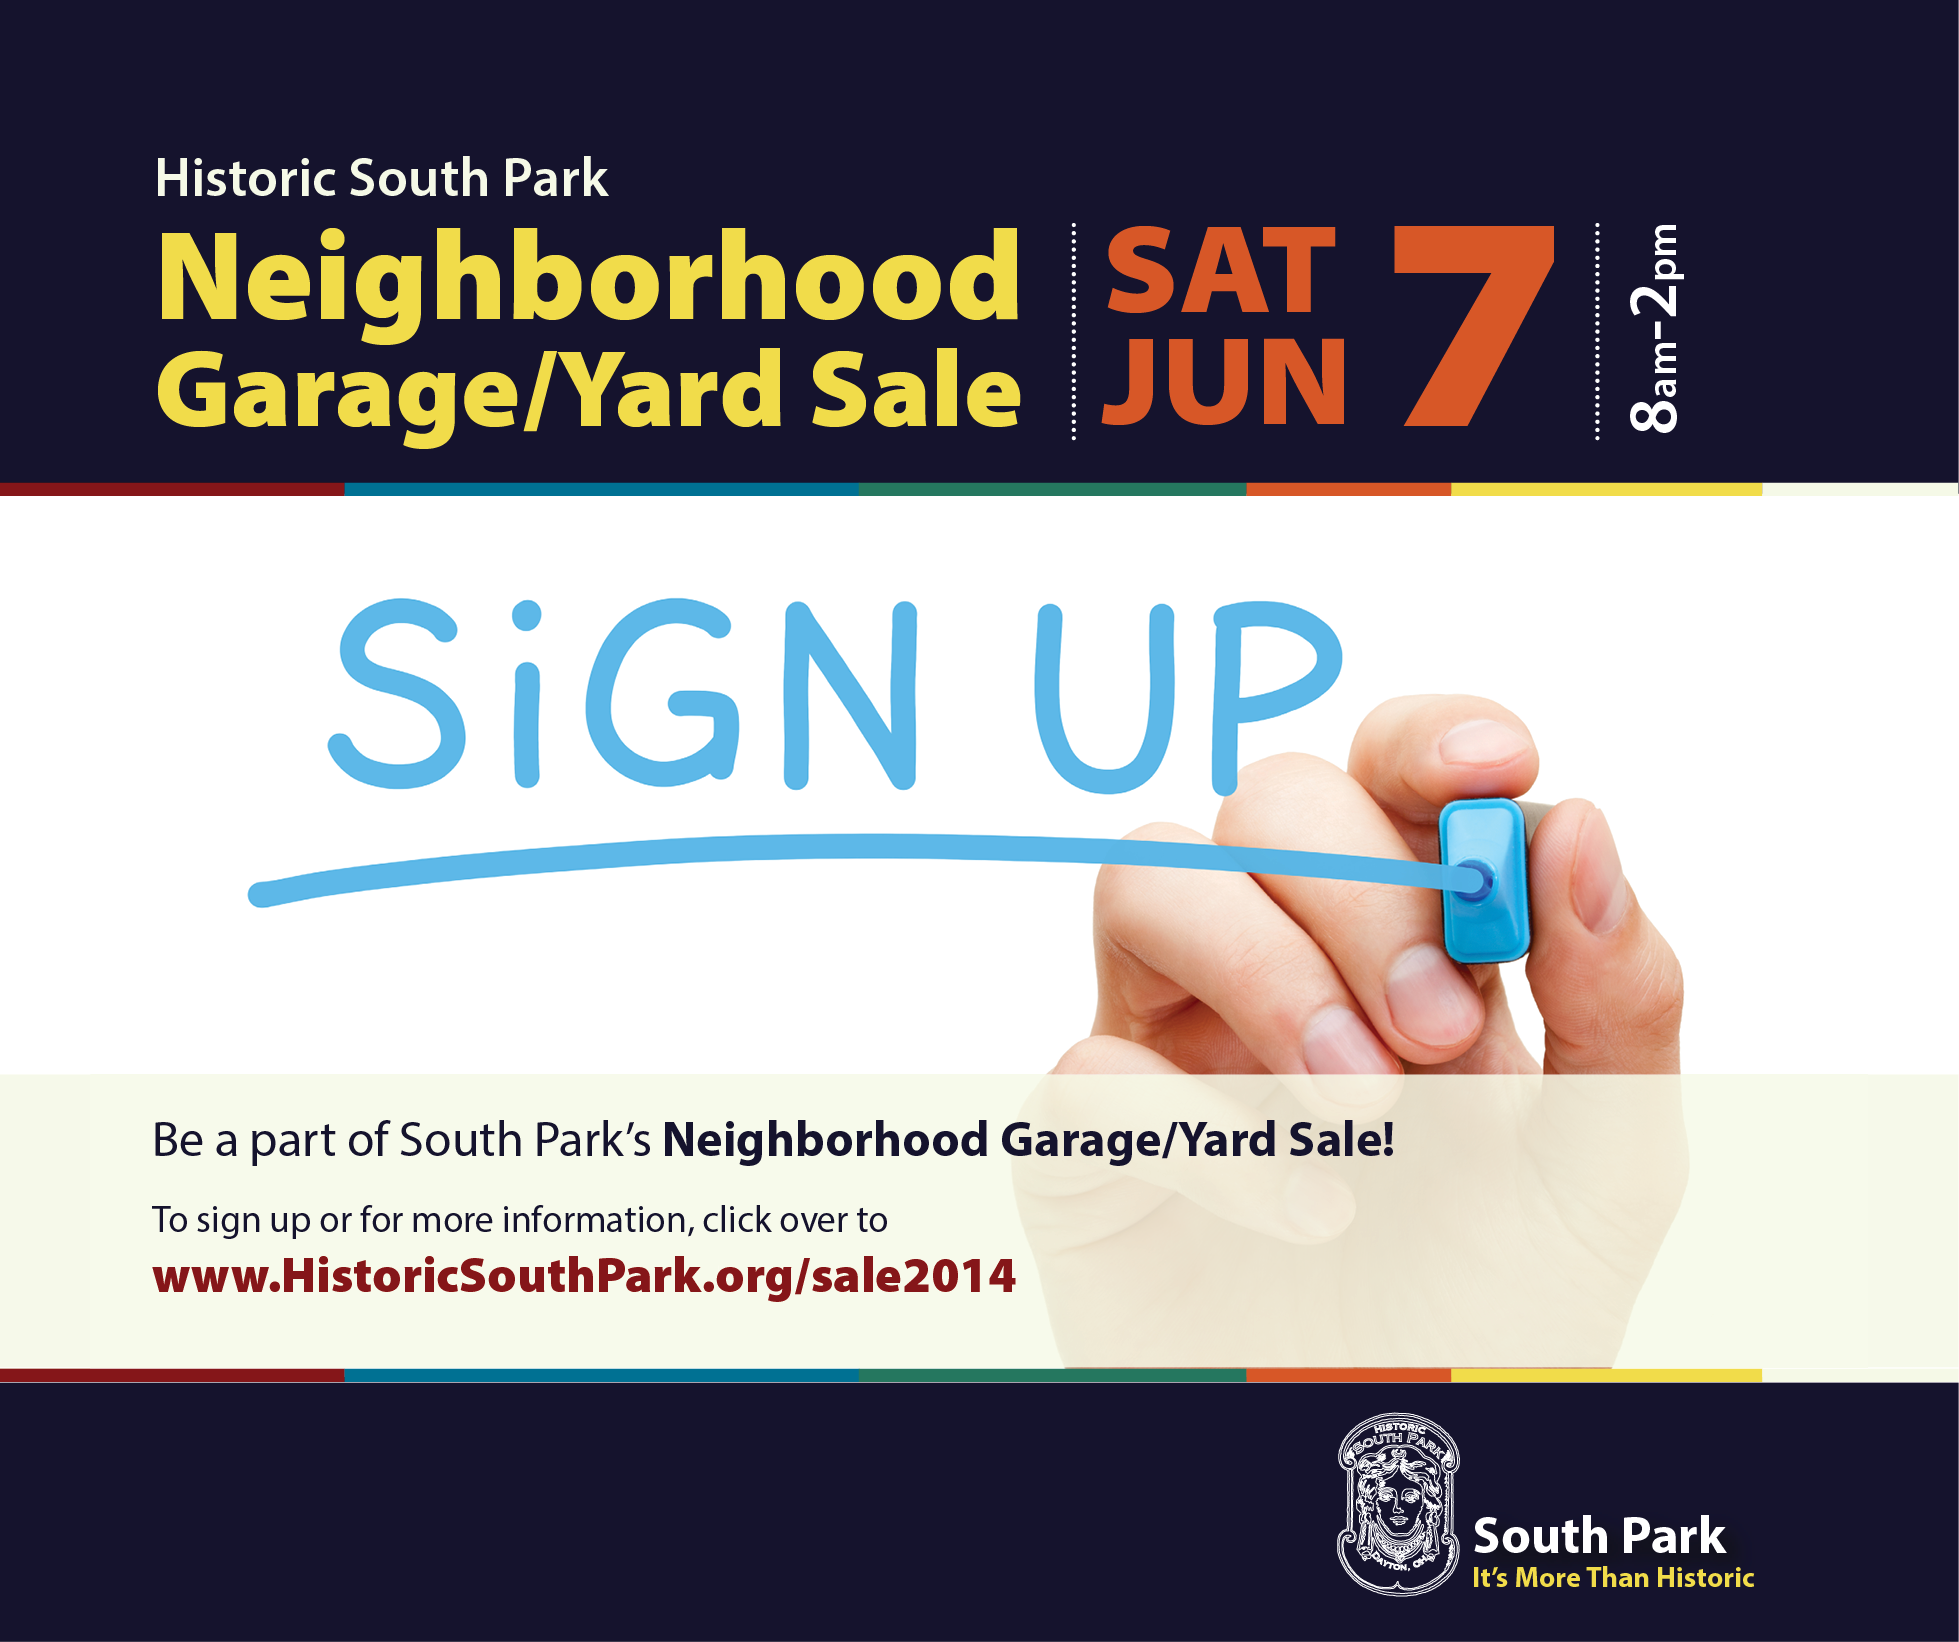 Be a part of Historic South Park & Oregon District’s Neighborhood Garage/Yard Sale